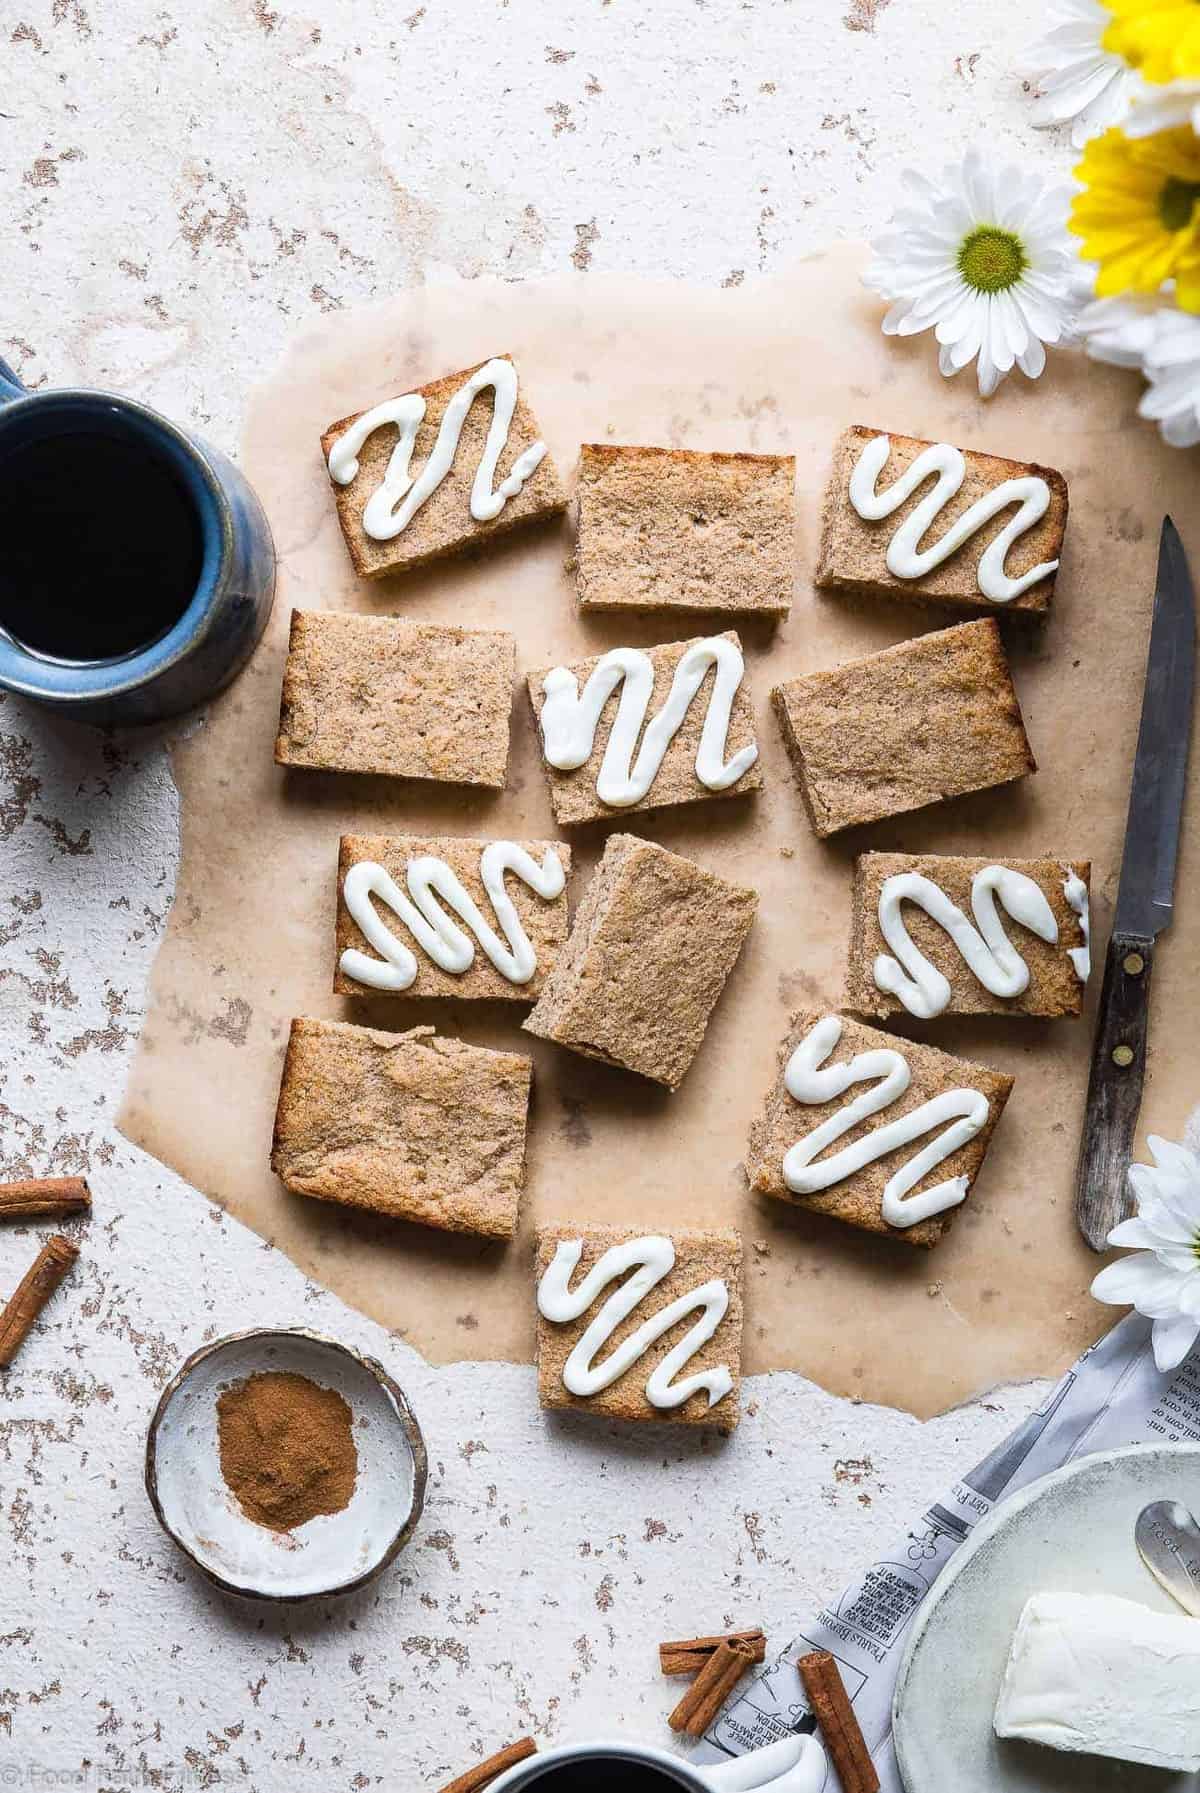 Easy Sugar Free Keto Low Carb Breakfast Bars - These Low Carb Breakfast Bars are only 130 calories and tastes like a cinnamon roll in healthy, gluten free form! Great for kids and adults and perfect for busy mornings! | #Foodfaithfitness | #Keto #Lowcarb #Glutenfree #Sugarfree #Healthy